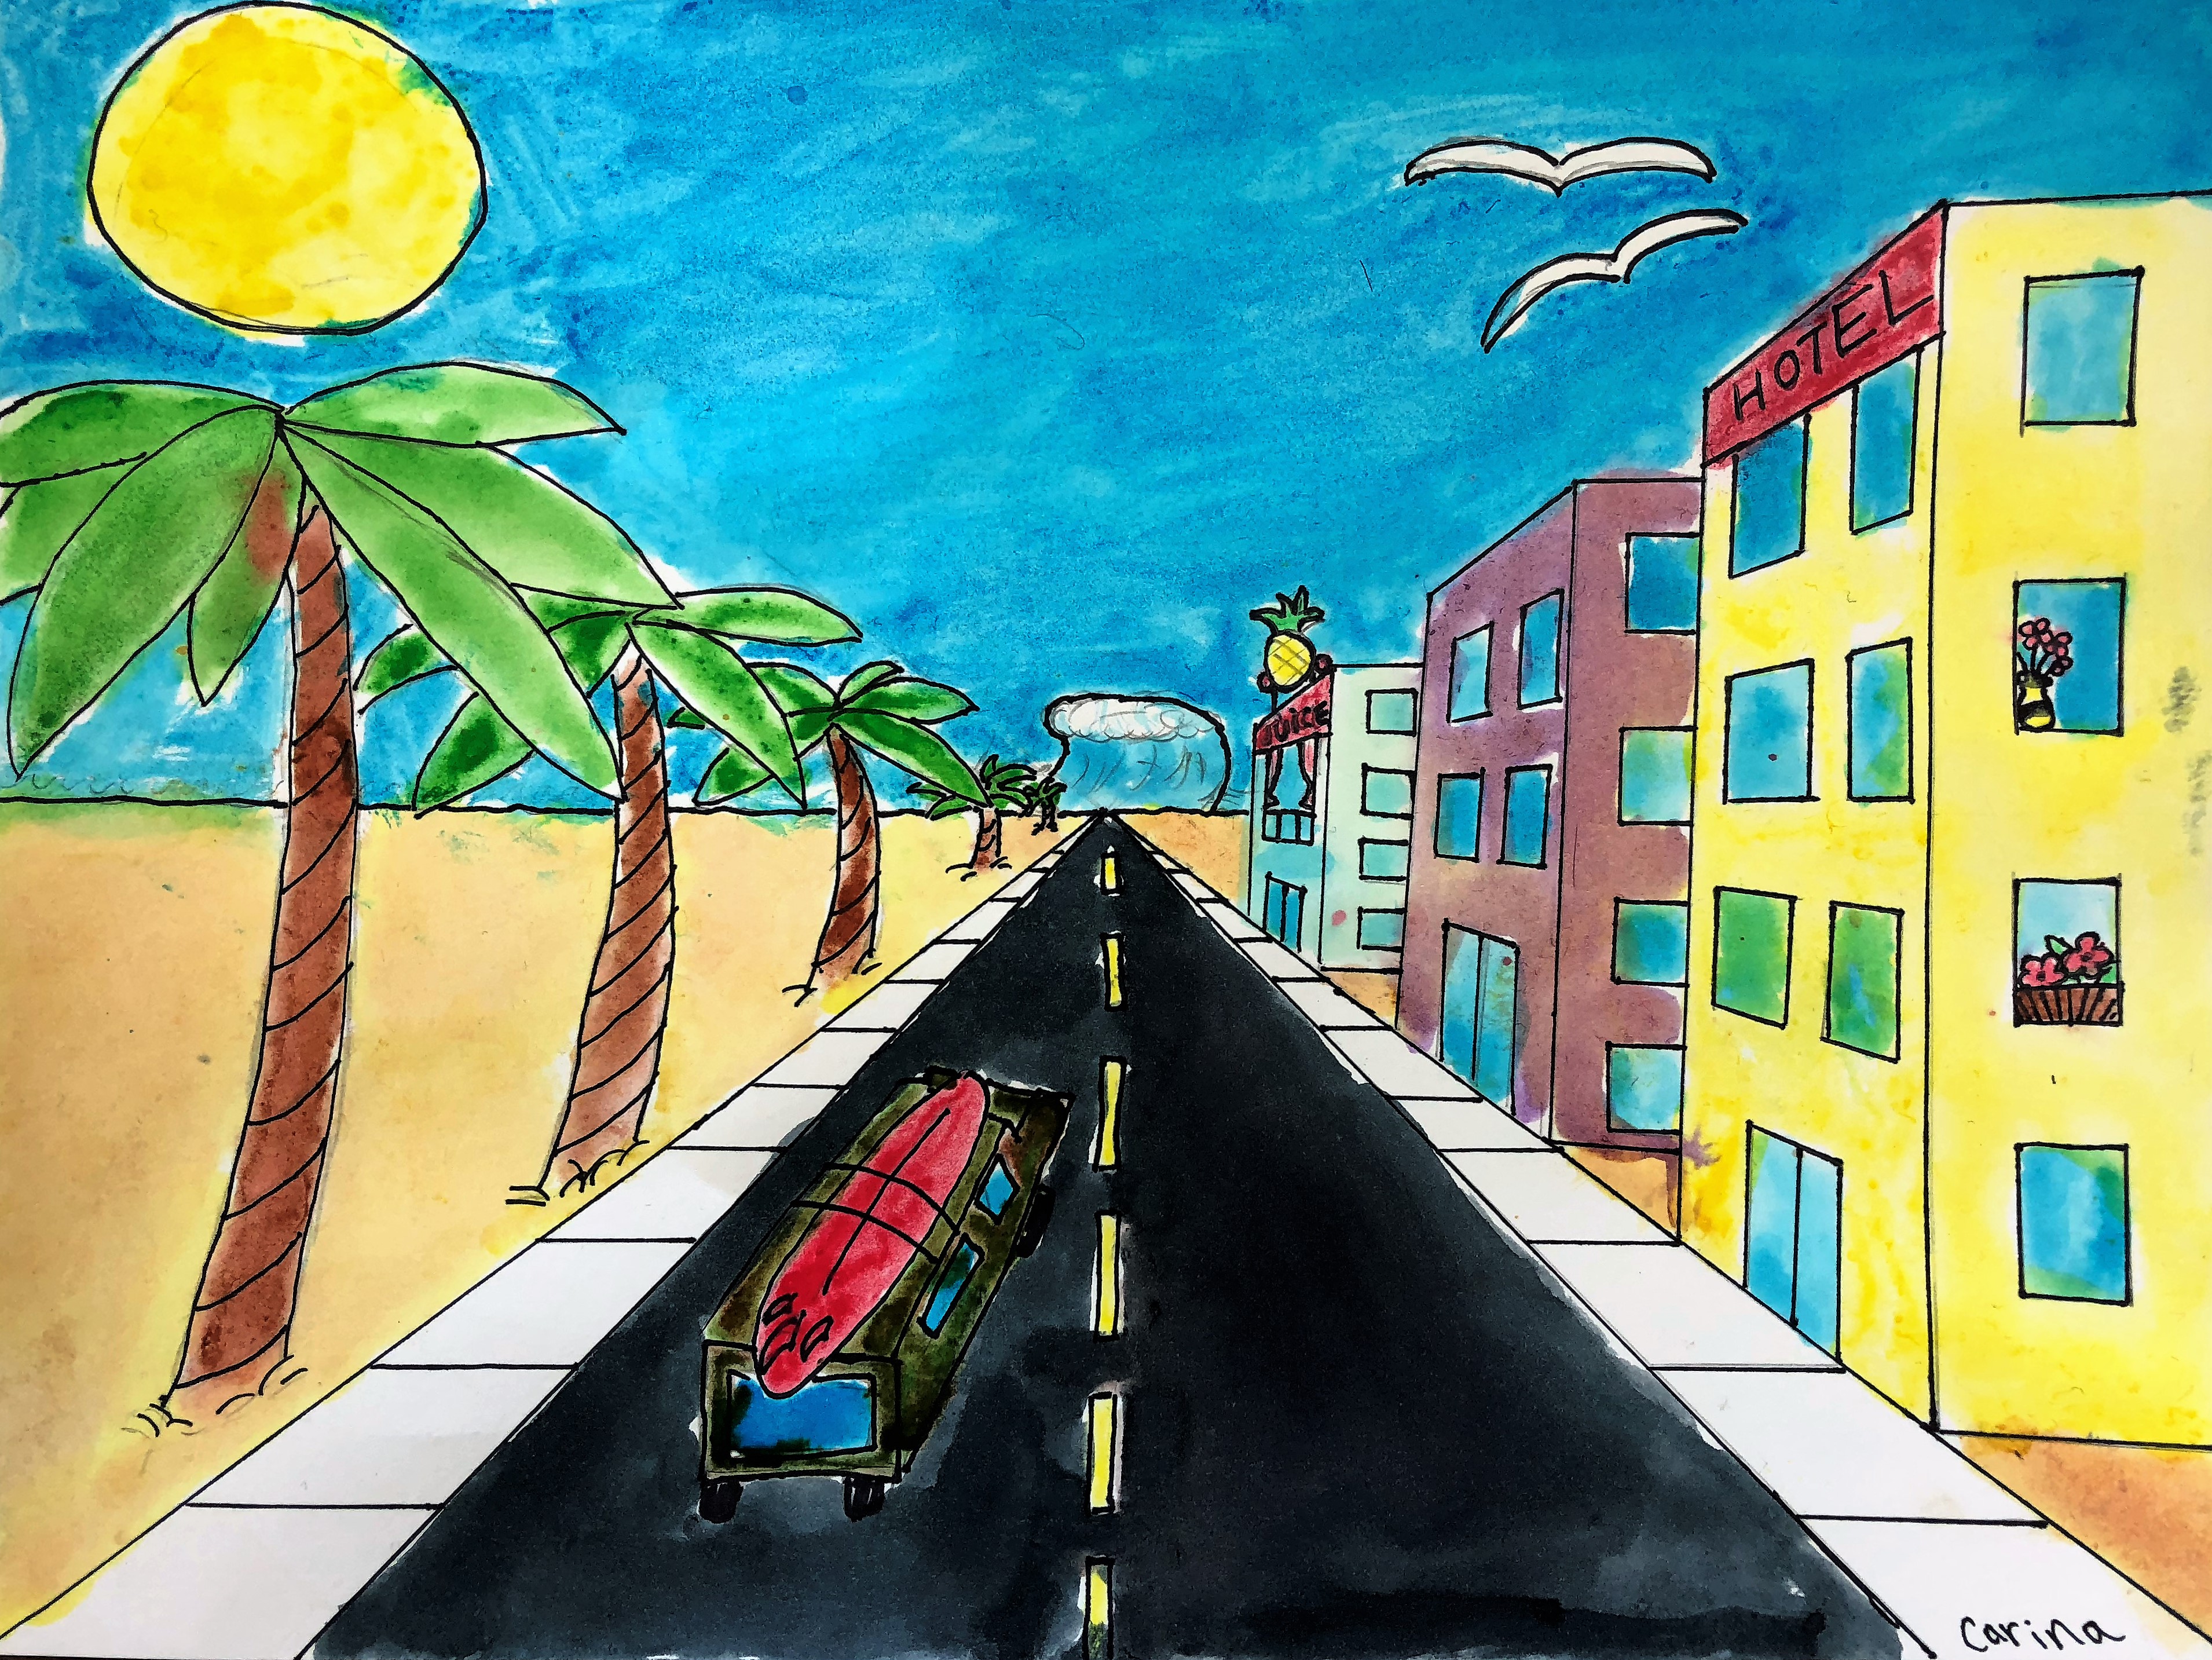 Draw a Street Scene With One-Point Perspective